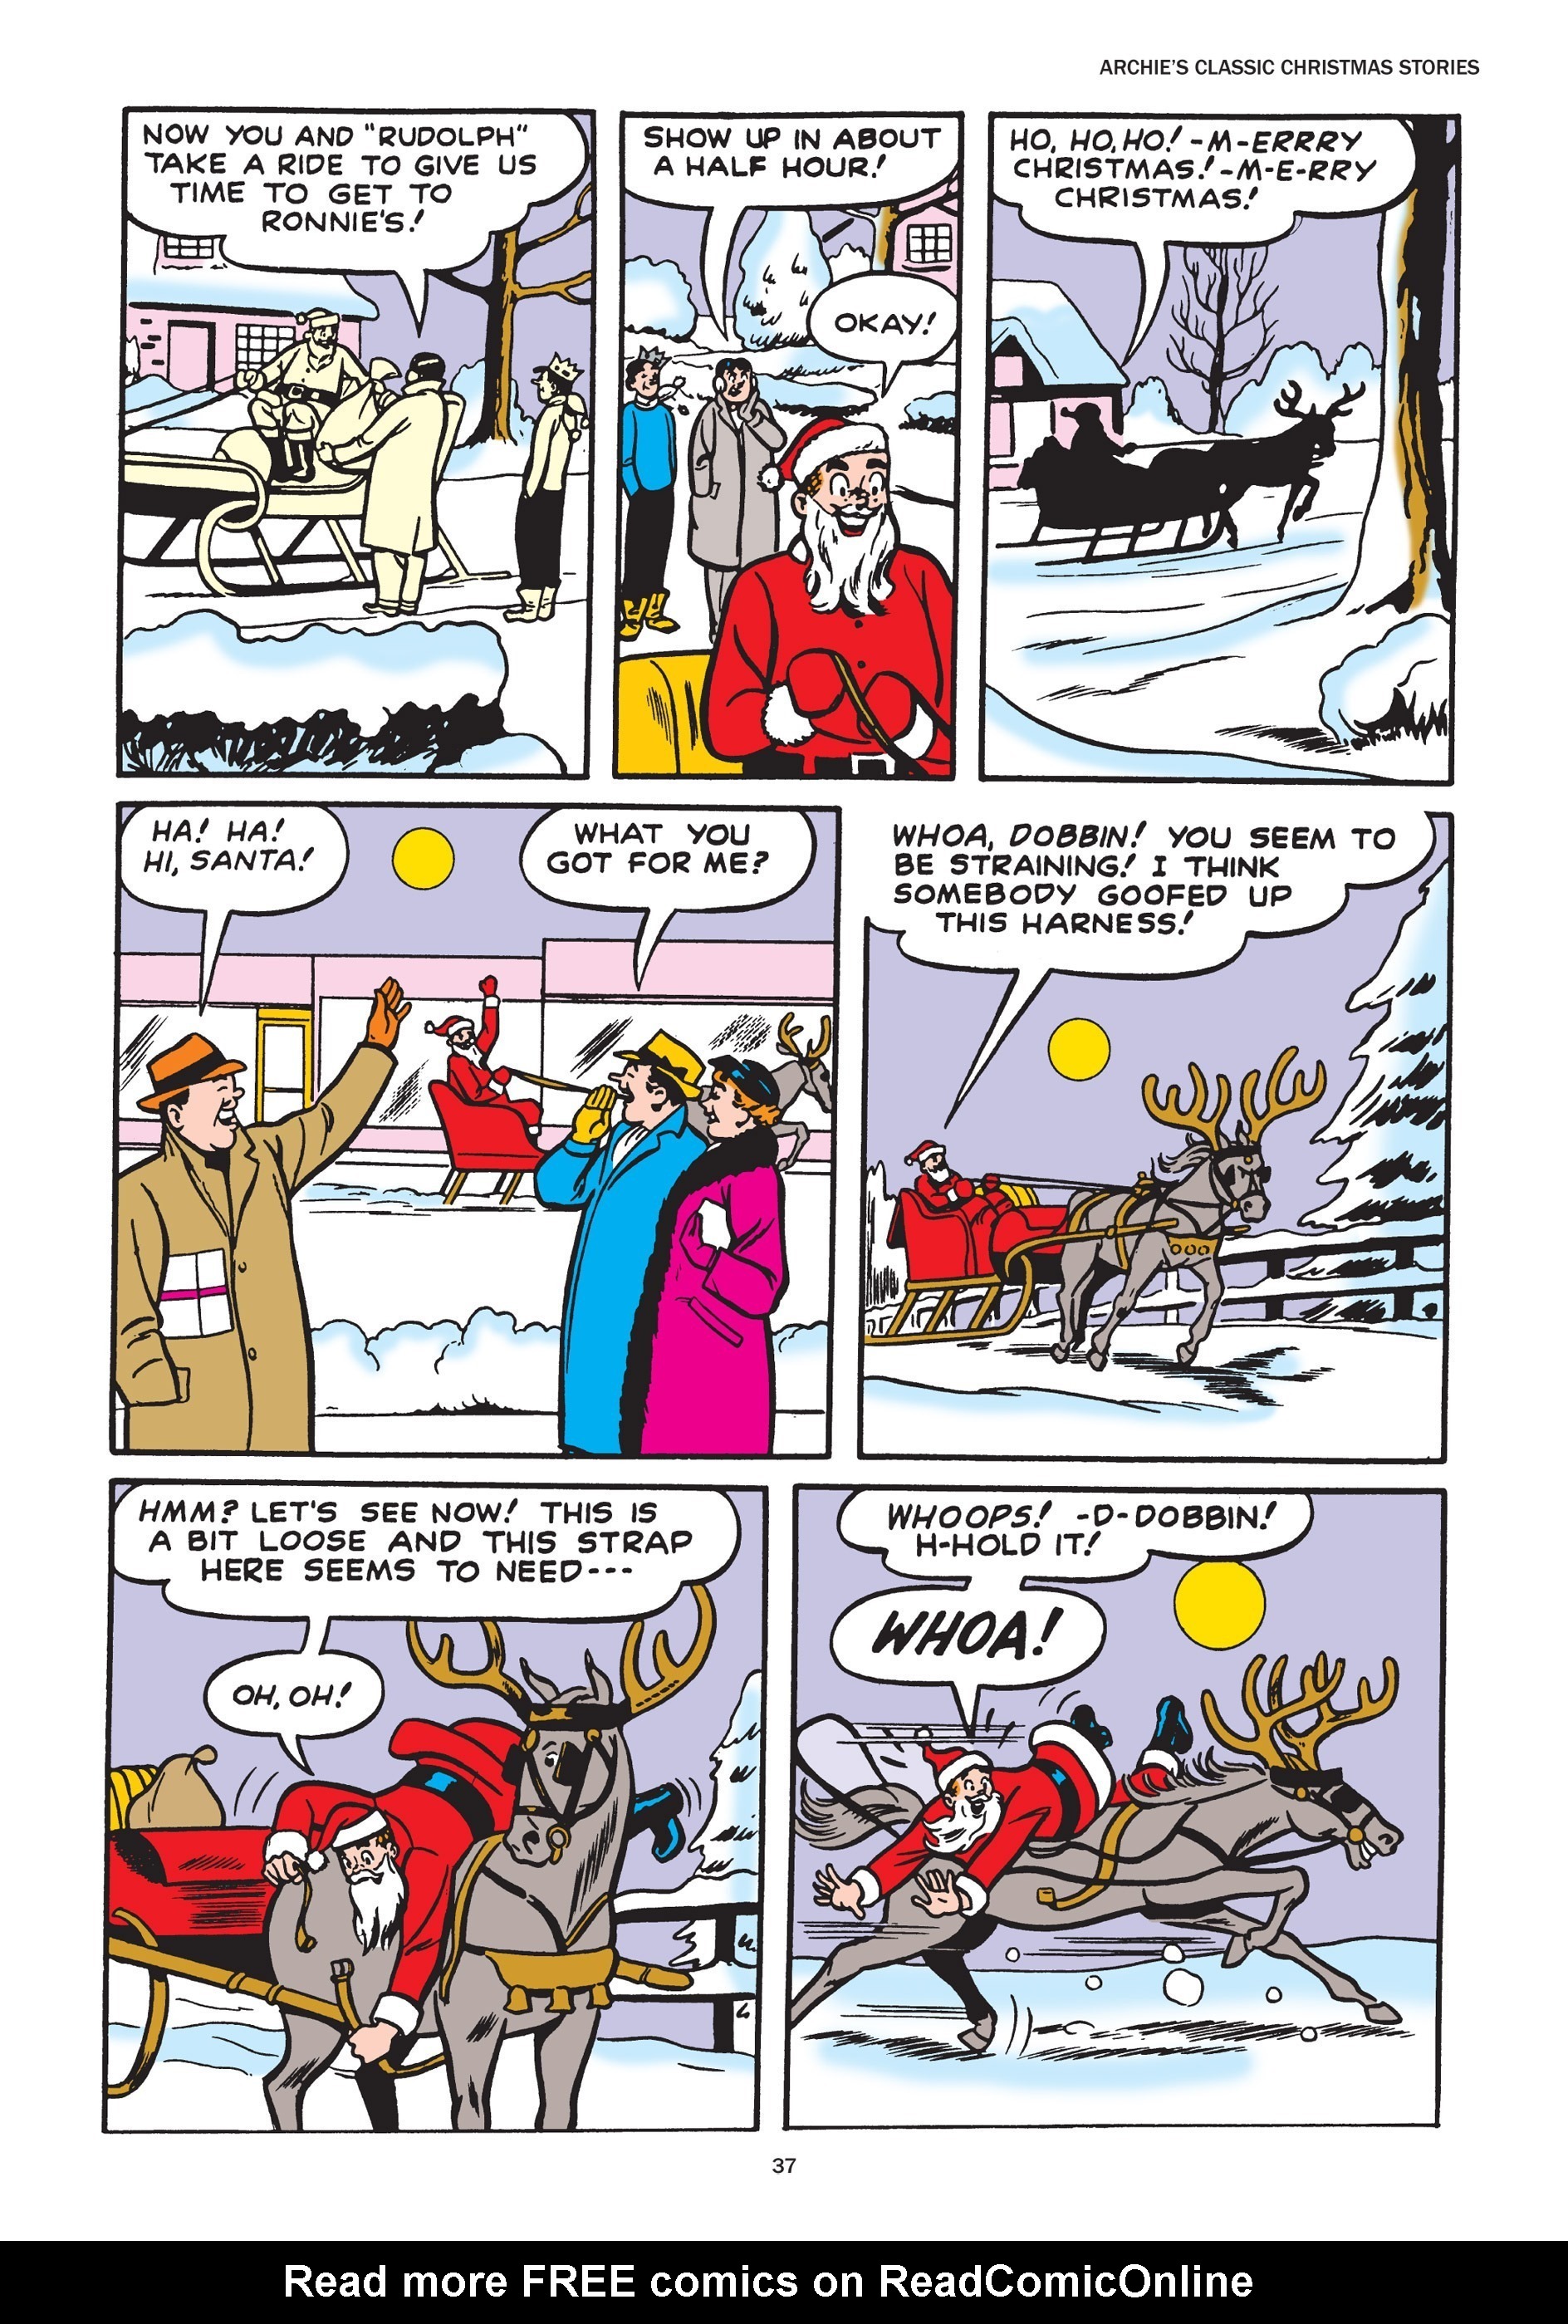 Read online Archie's Classic Christmas Stories comic -  Issue # TPB - 38